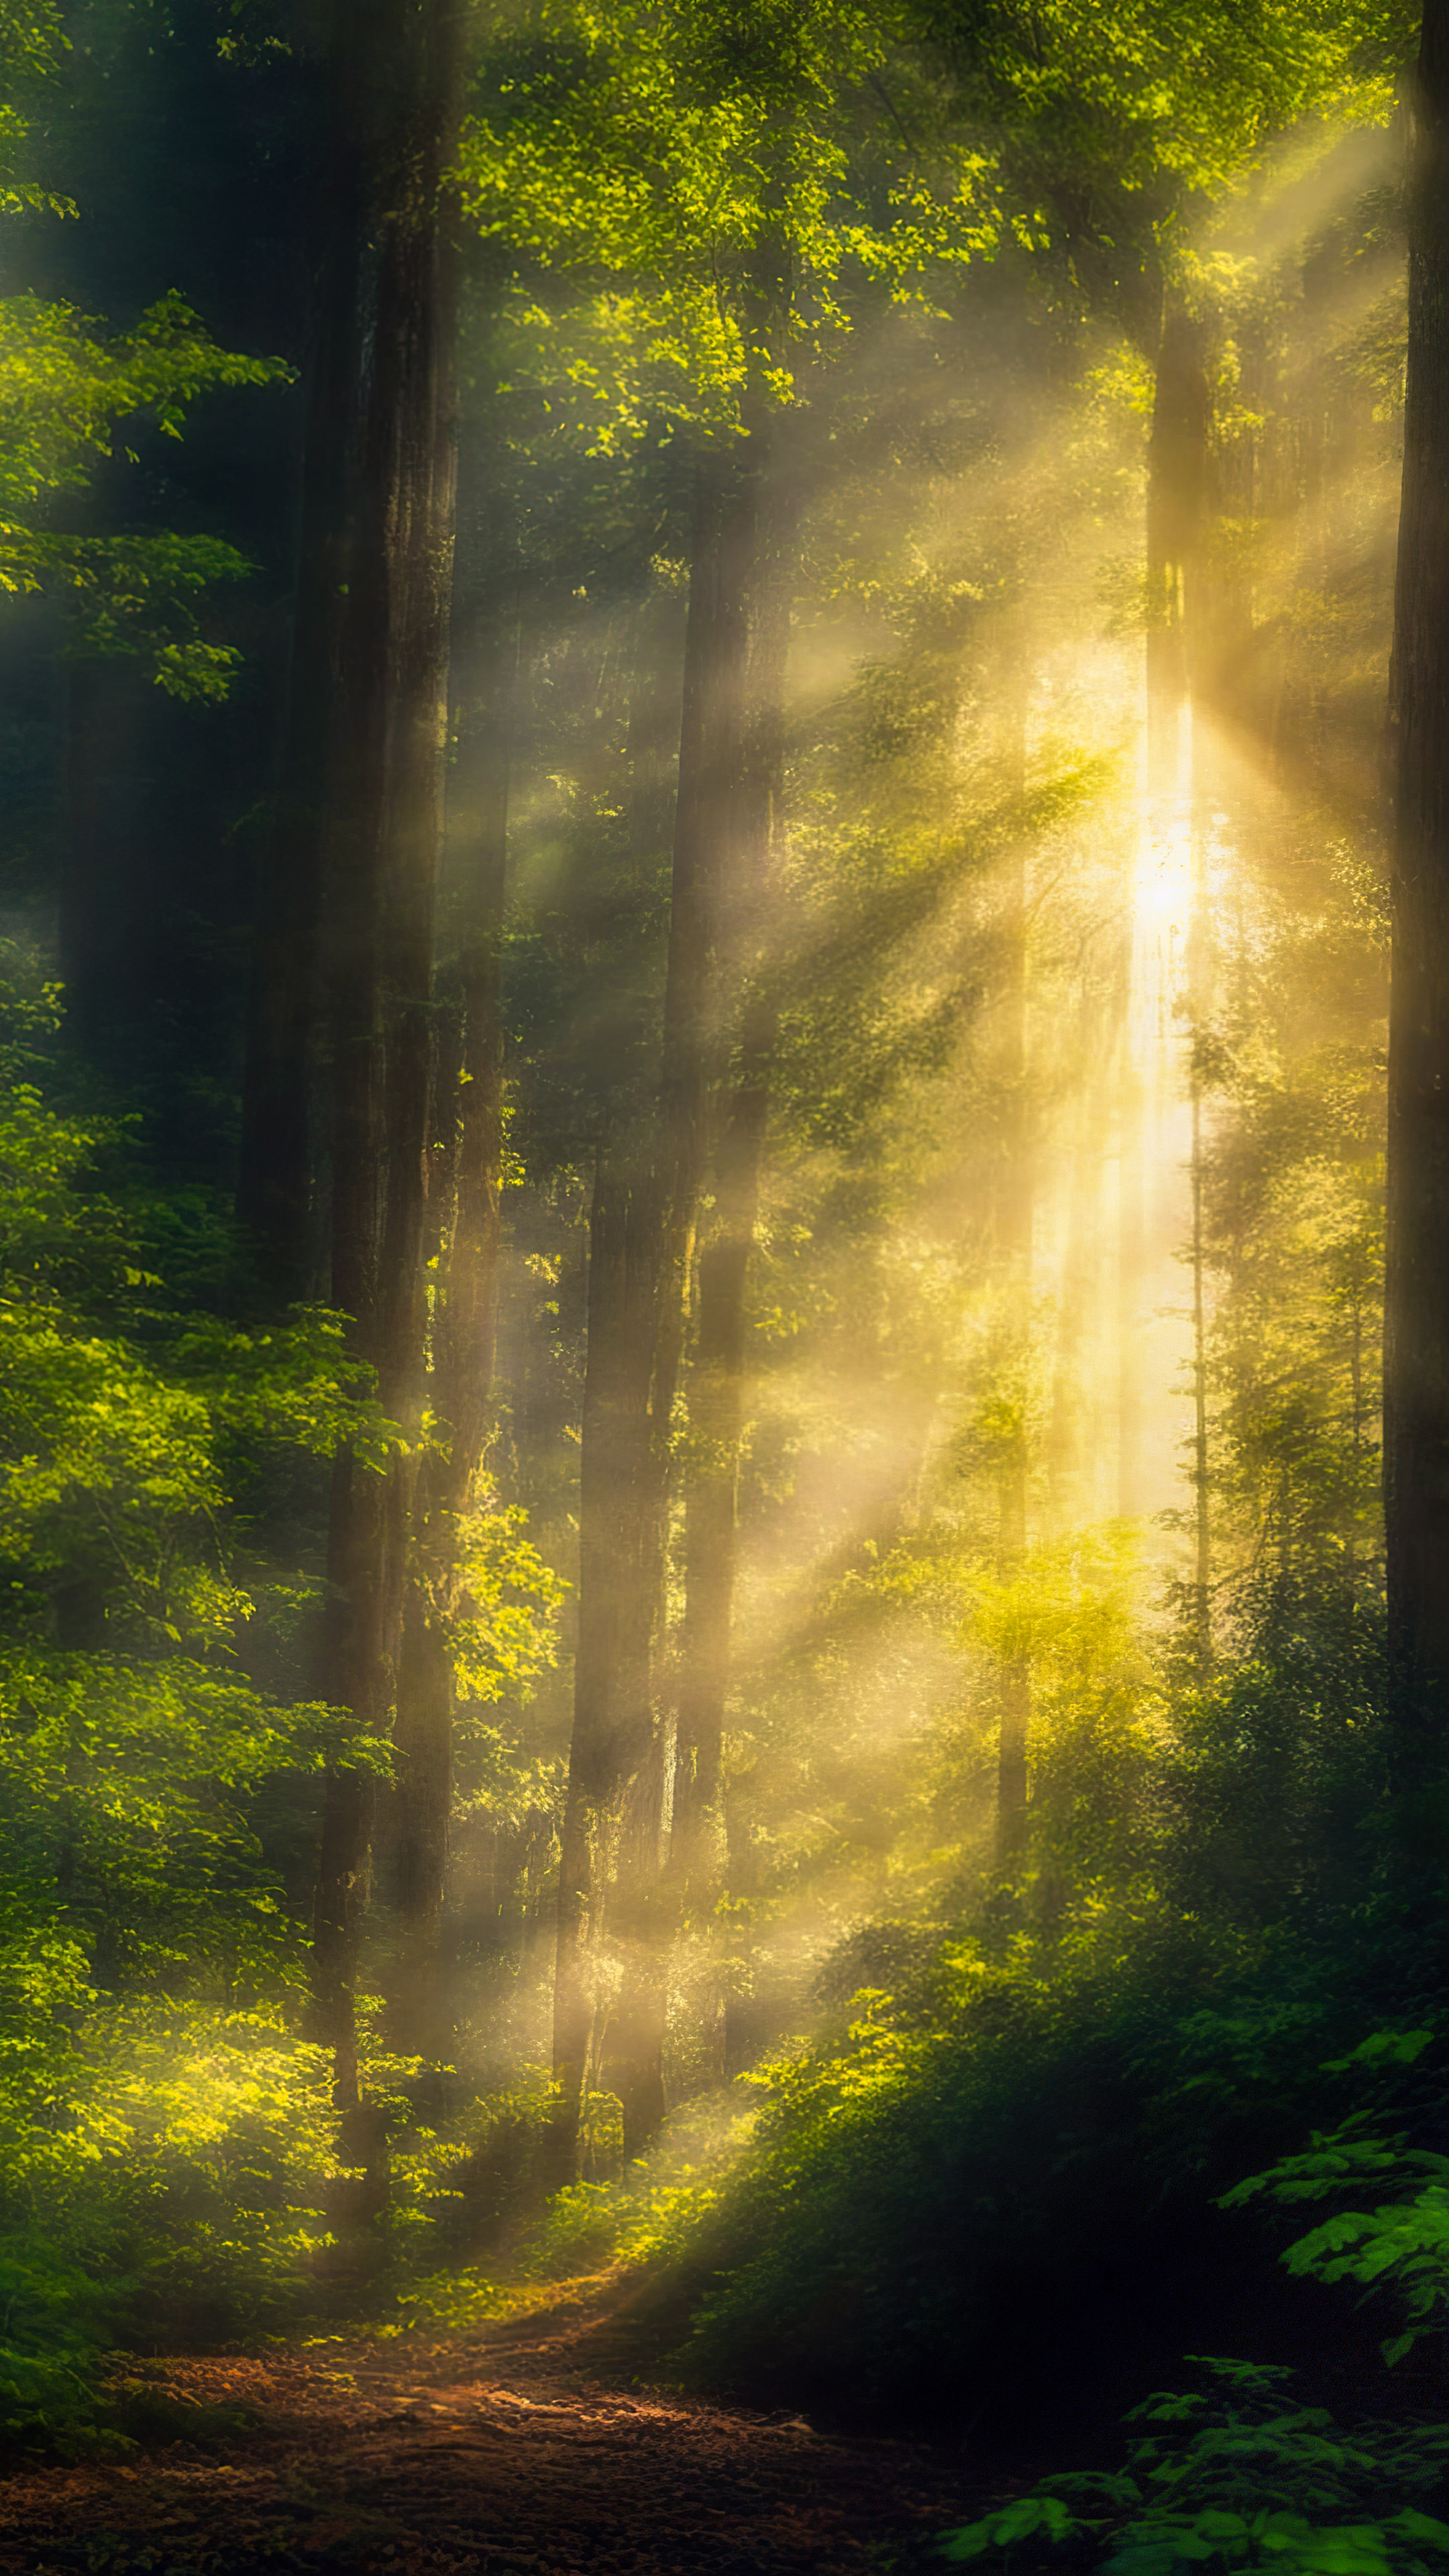 Download this nature wallpaper beautiful pictures, presenting a serene woodland scene with sunlight filtering through the dense canopy, casting dappled shadows on the forest floor.